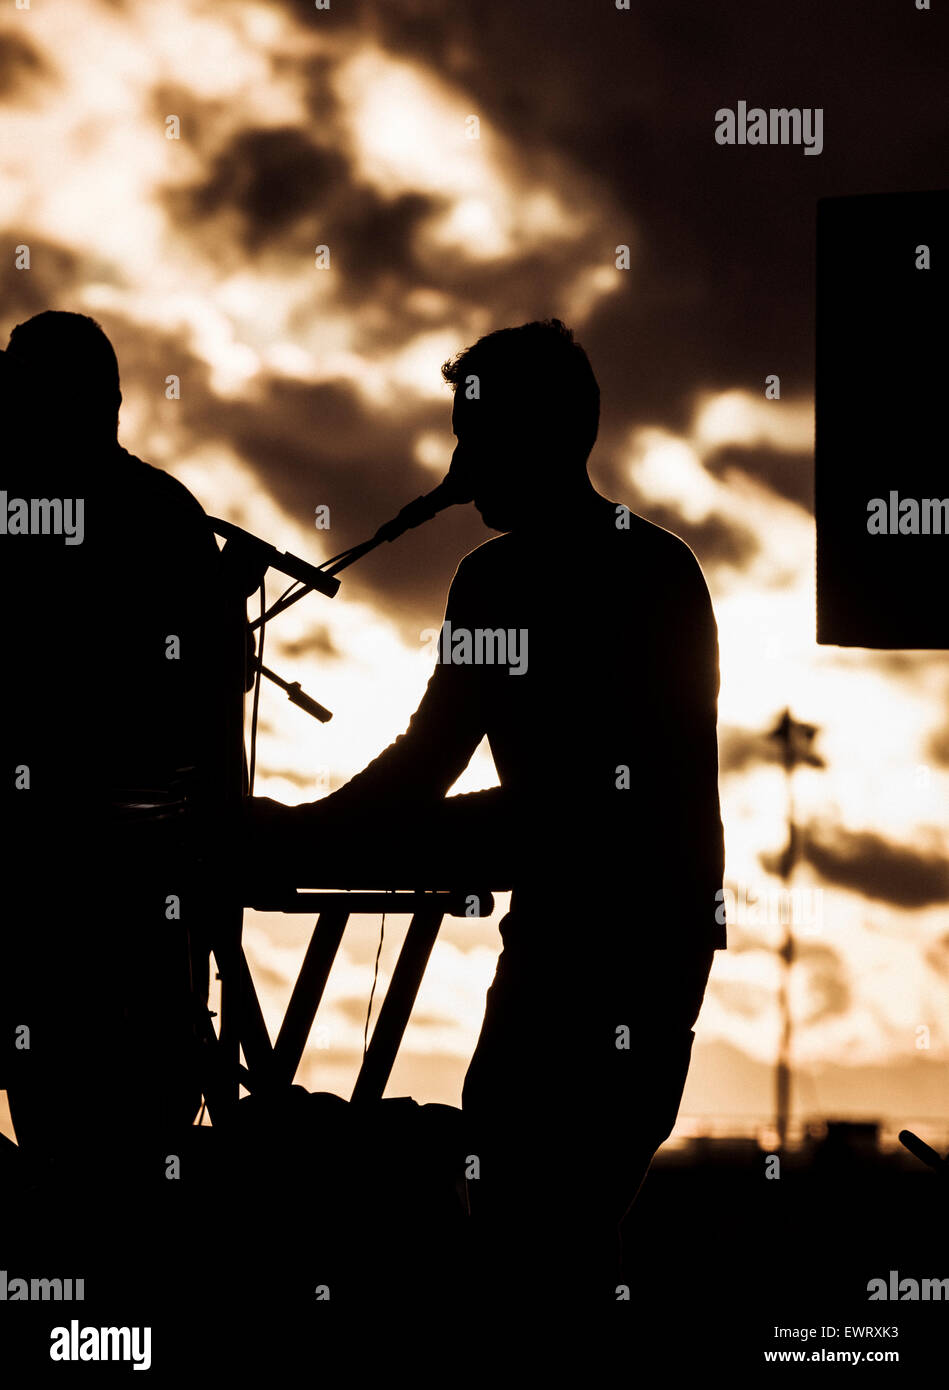 Band on stage at festival in silhouette at sunset Stock Photo